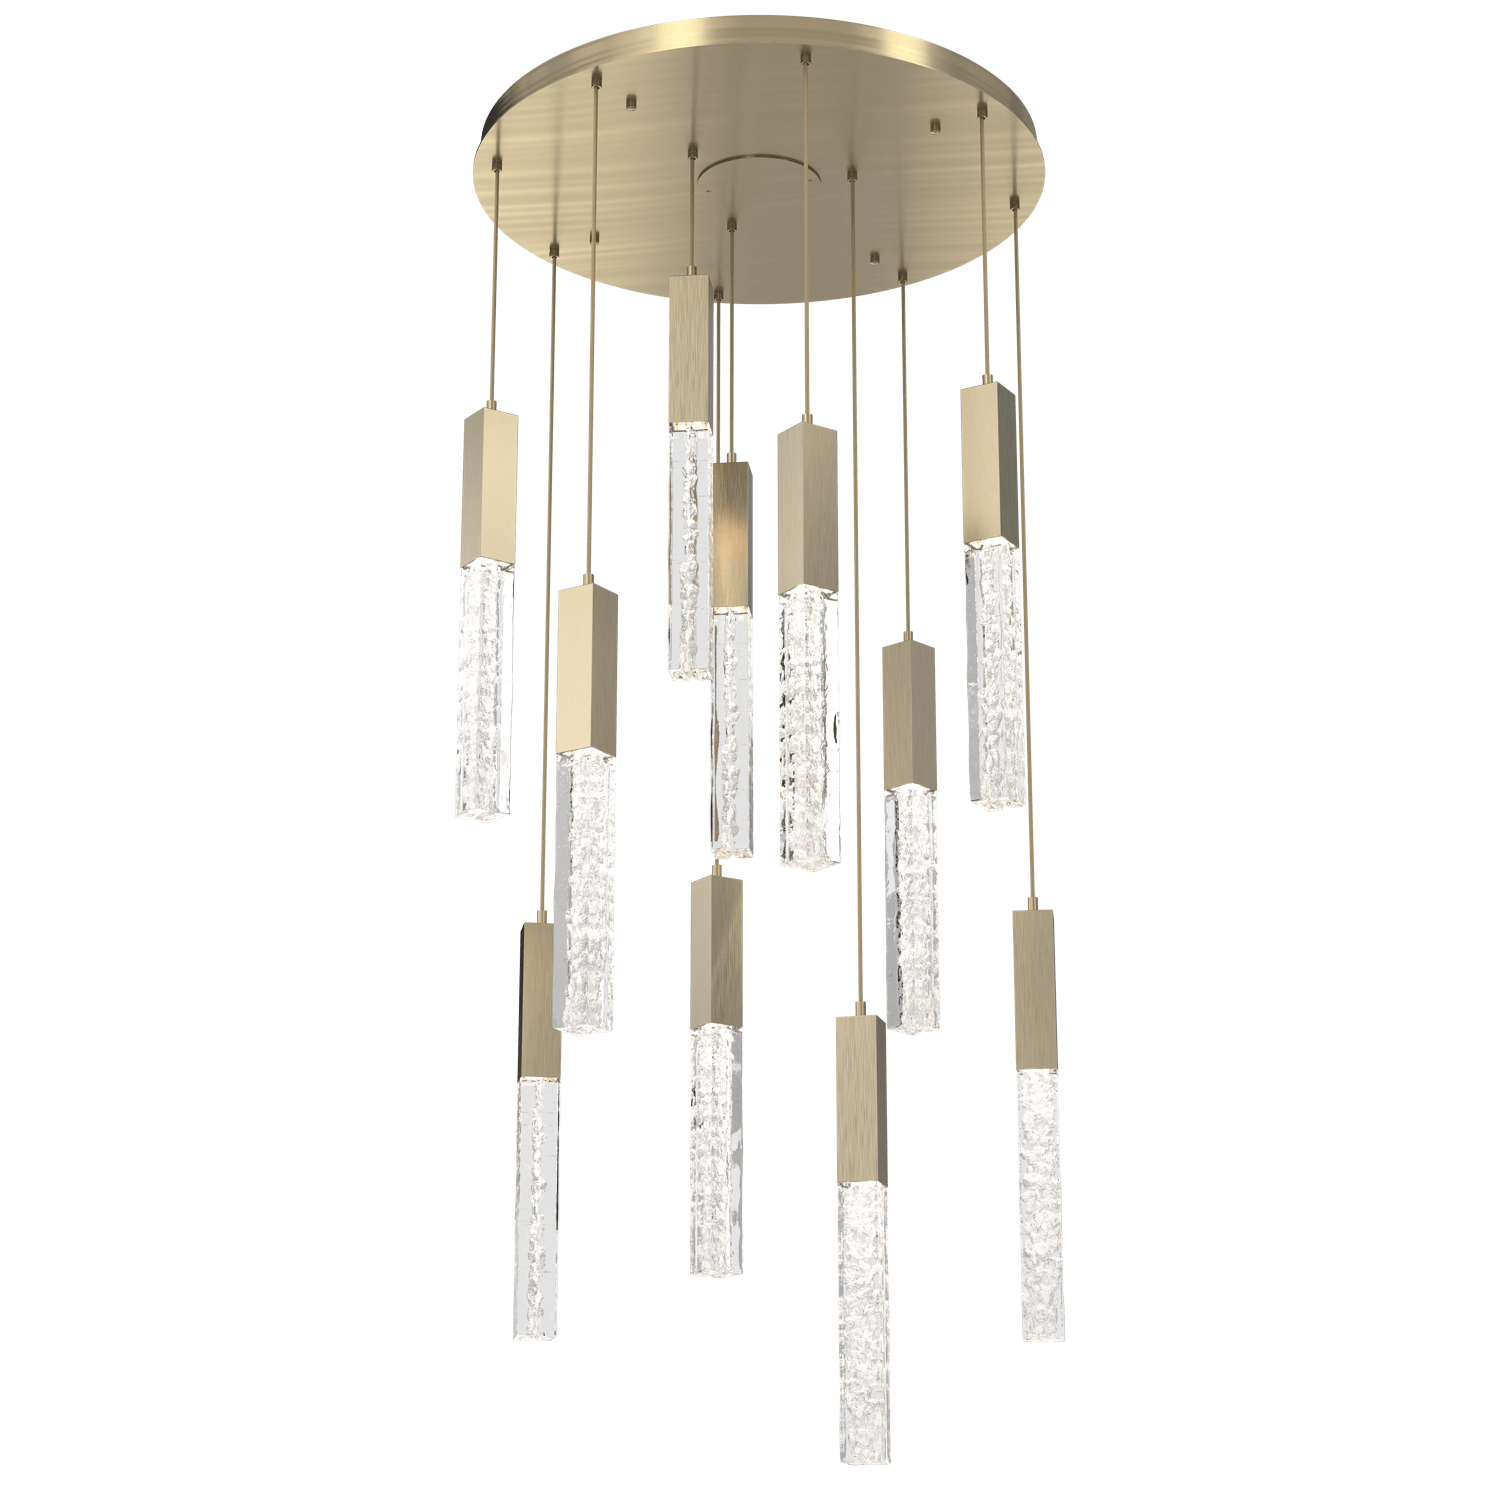 CHB0060-11-HB-GC-Hammerton-Studio-Axis-11-Light-Pendant-Chandelier-with-Heritage-Brass-finish-and-clear-cast-glass-and-LED-lamping